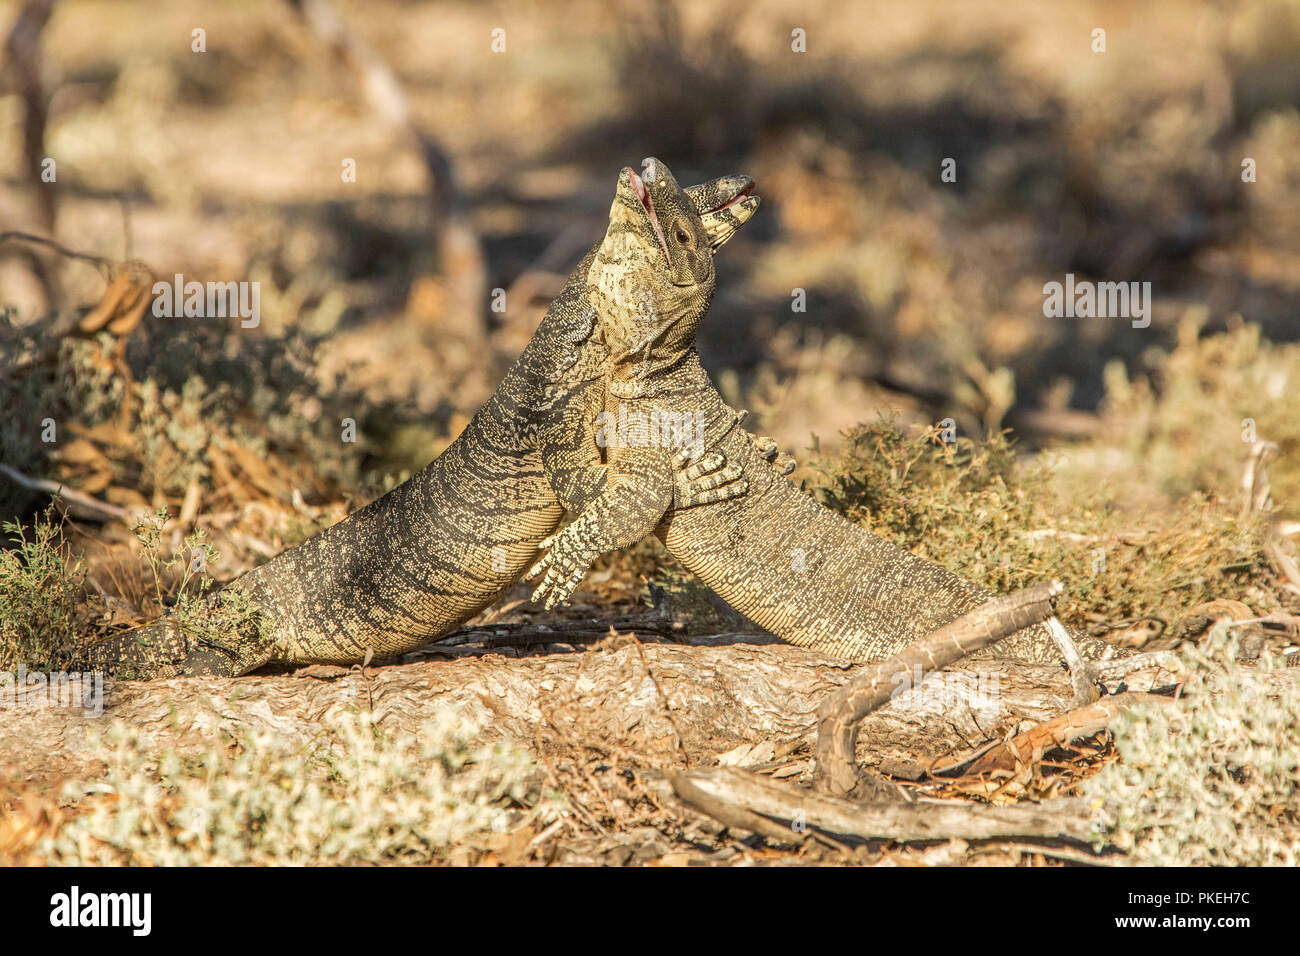 Two Australian goannas / lace monitor lizards mating in the wild at Culgoa National Park in outback NSW Stock Photo